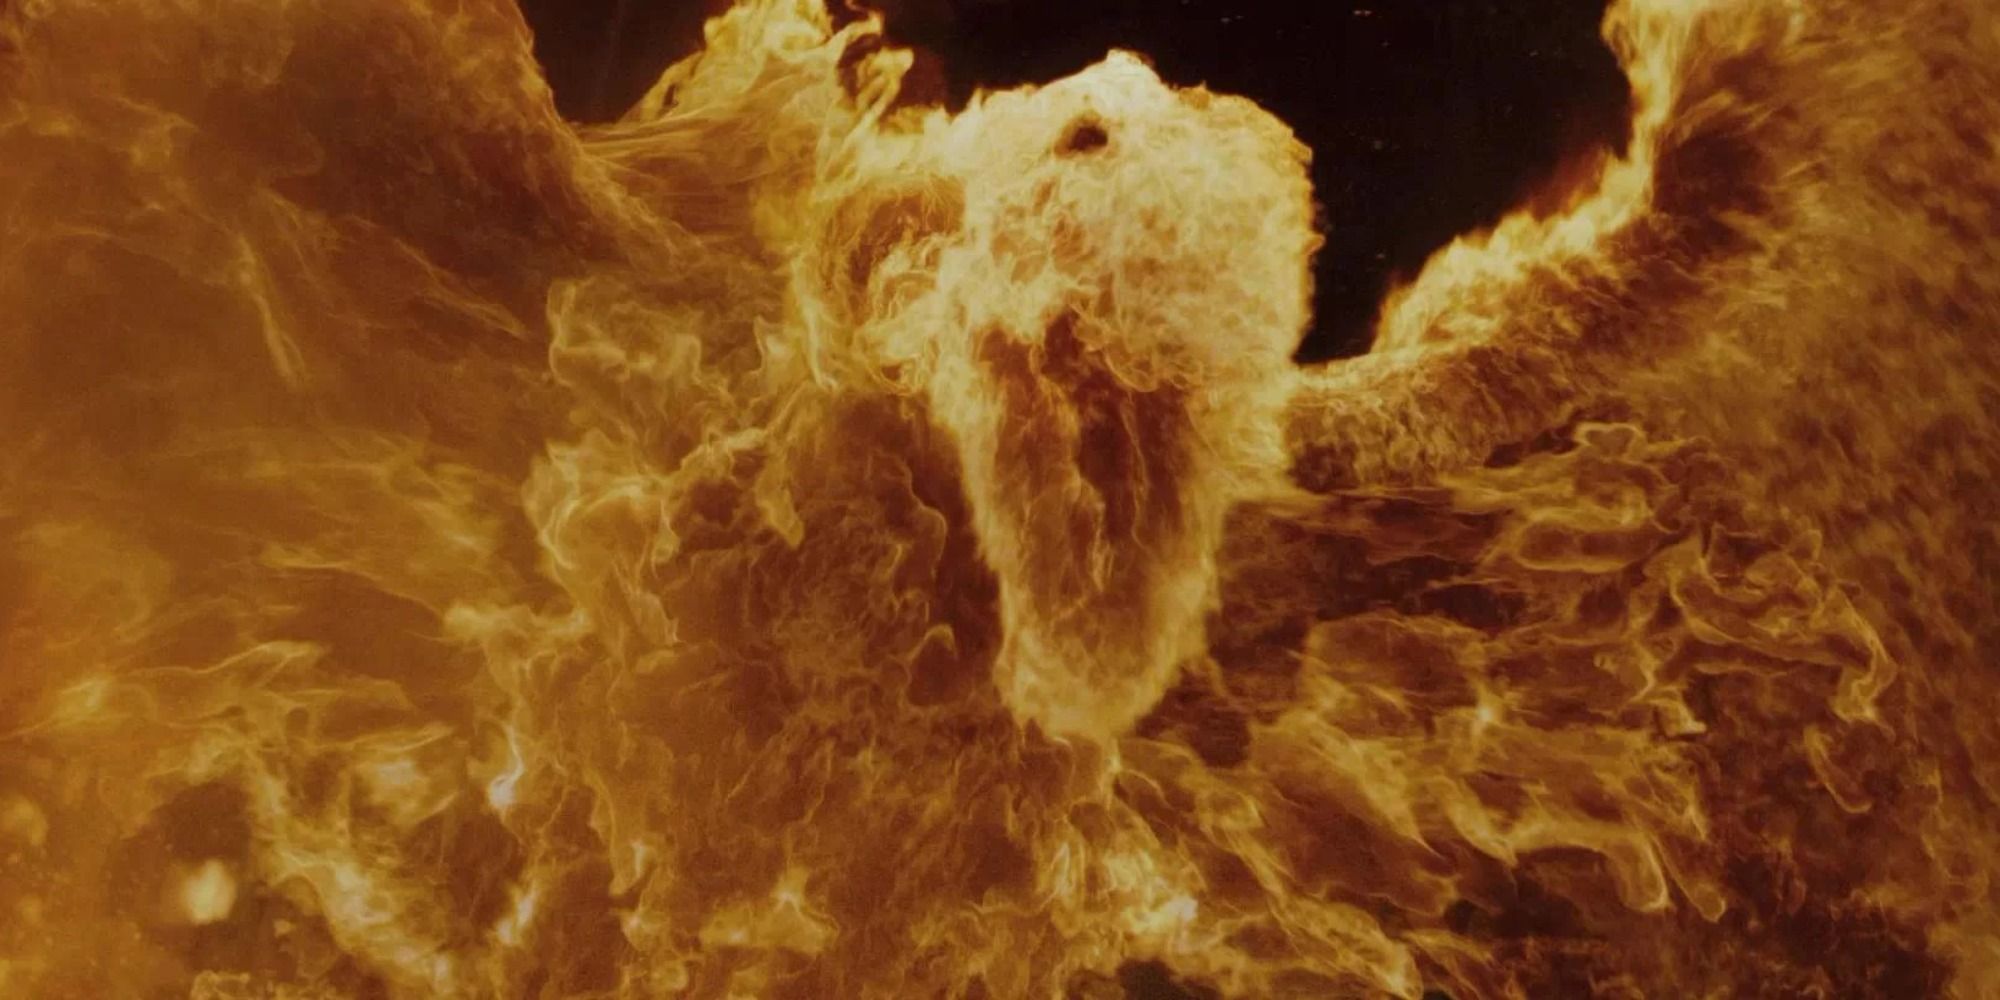 A fiery bird conjured by Crabbe's Fiendfyre curse in Harry Potter and the Deathly Hallows